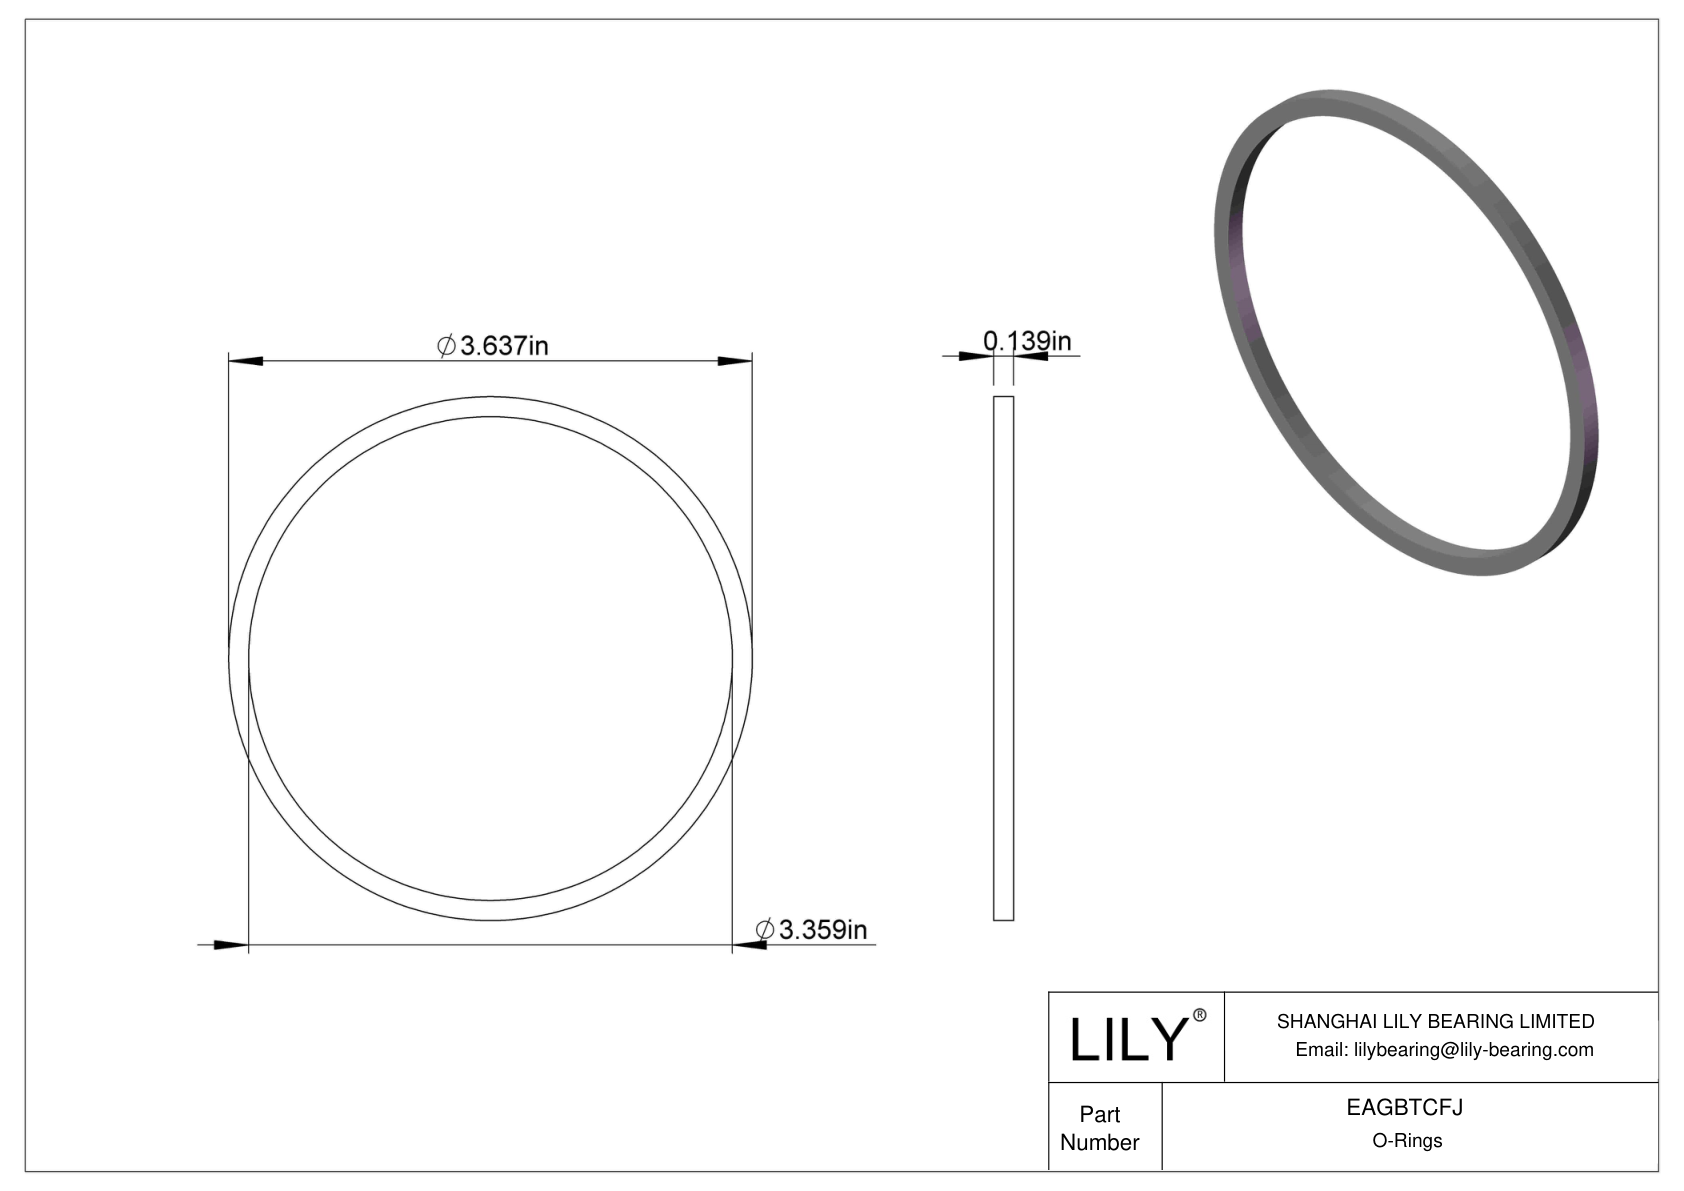 EAGBTCFJ Oil Resistant O-Rings Square cad drawing